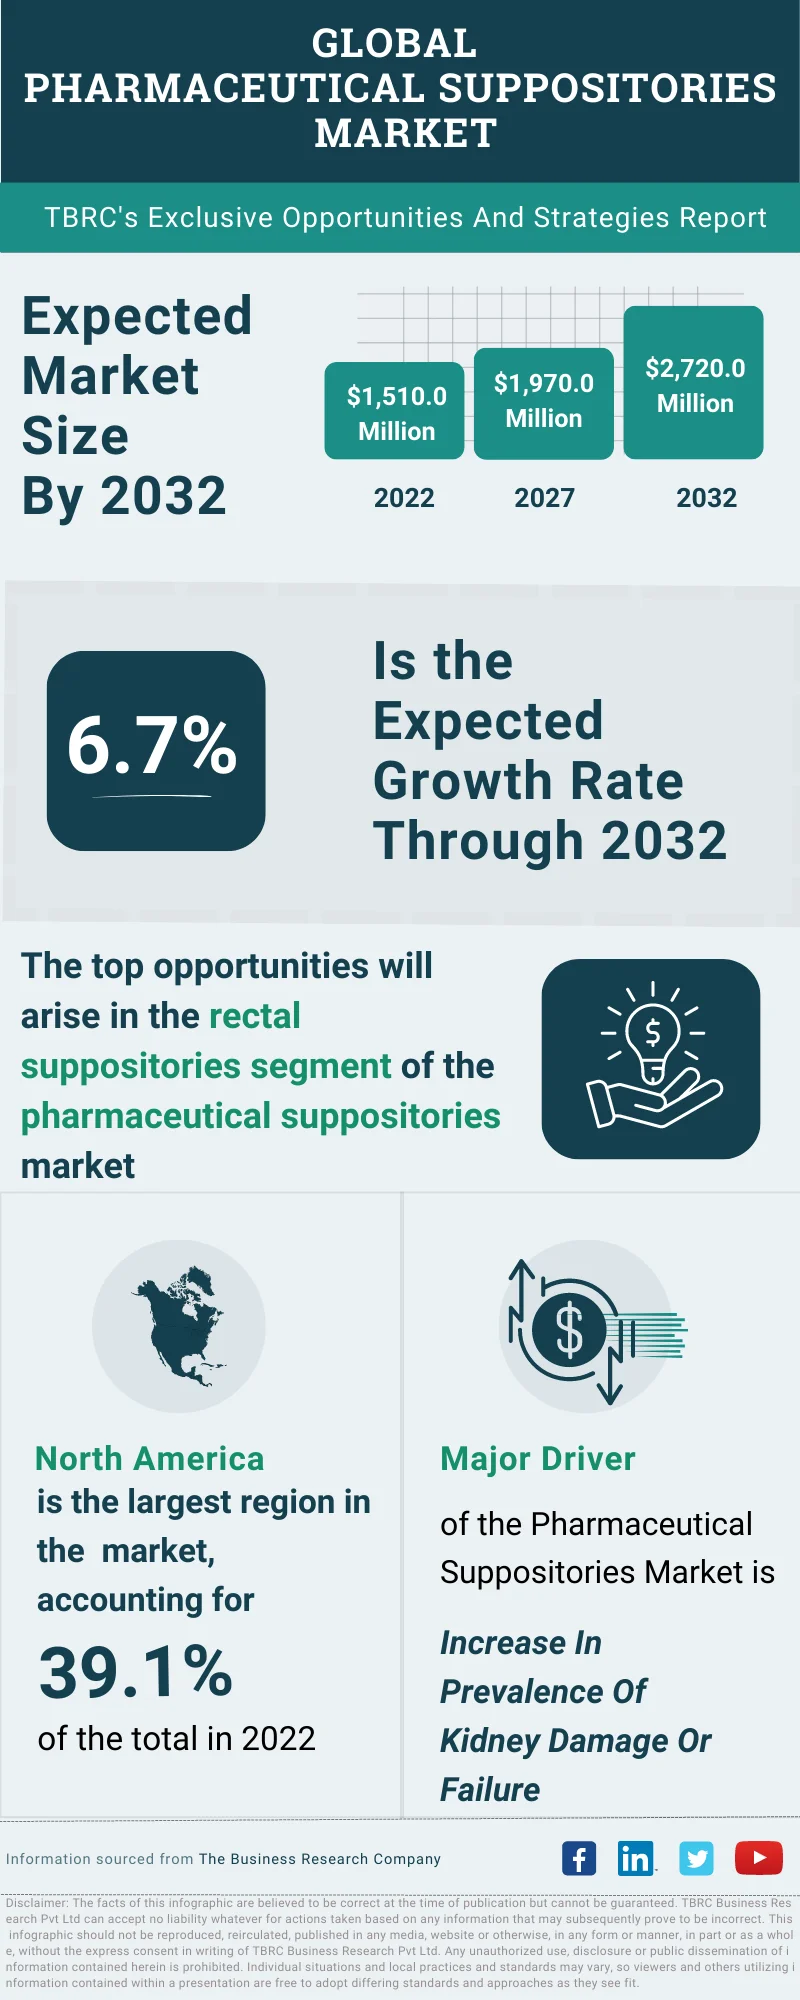 Pharmaceutical Suppositories Global Market Opportunities And Strategies To 2032